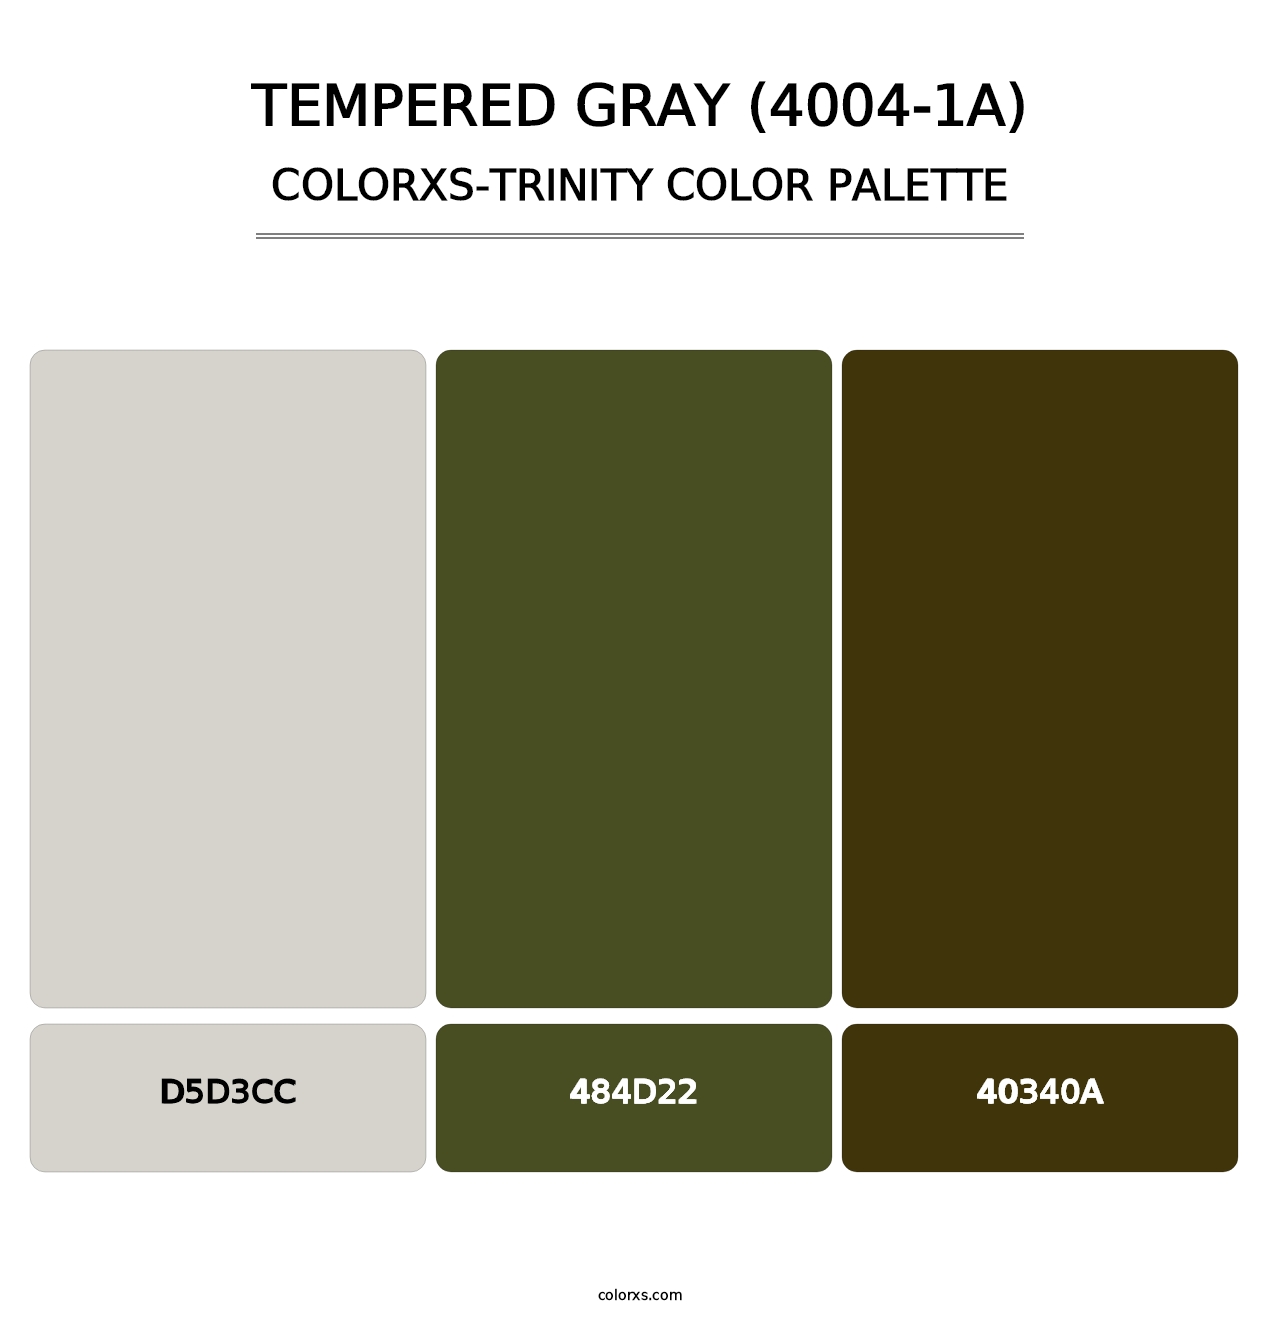 Tempered Gray (4004-1A) - Colorxs Trinity Palette